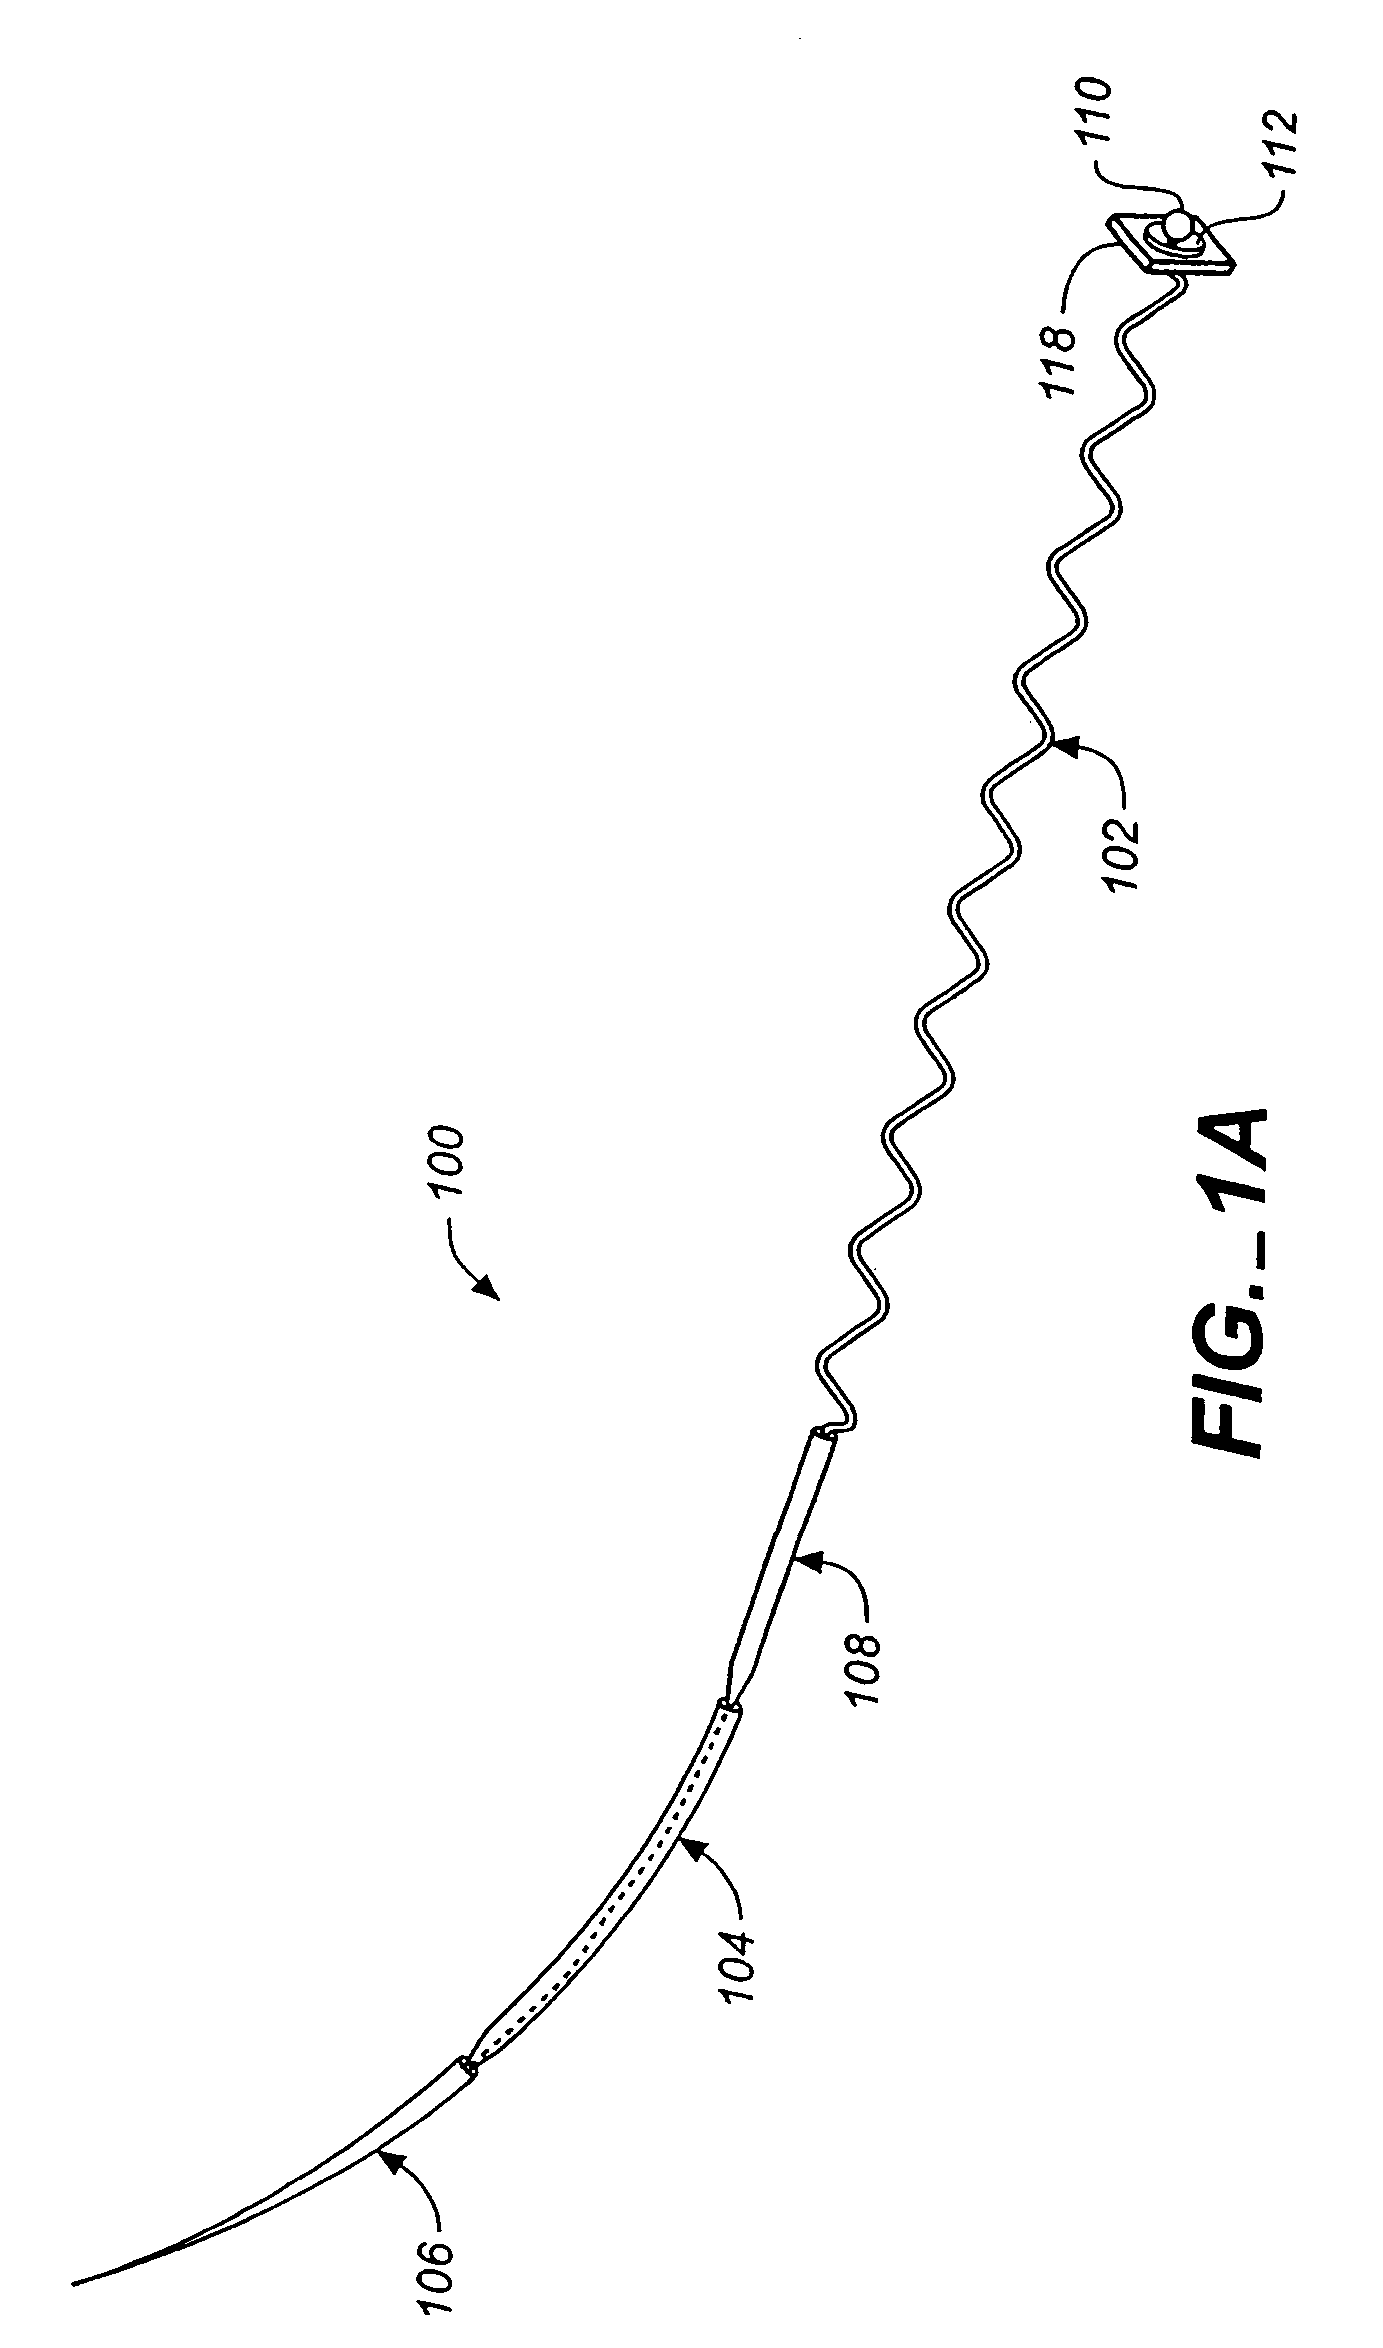 Annuloplasty apparatus and methods